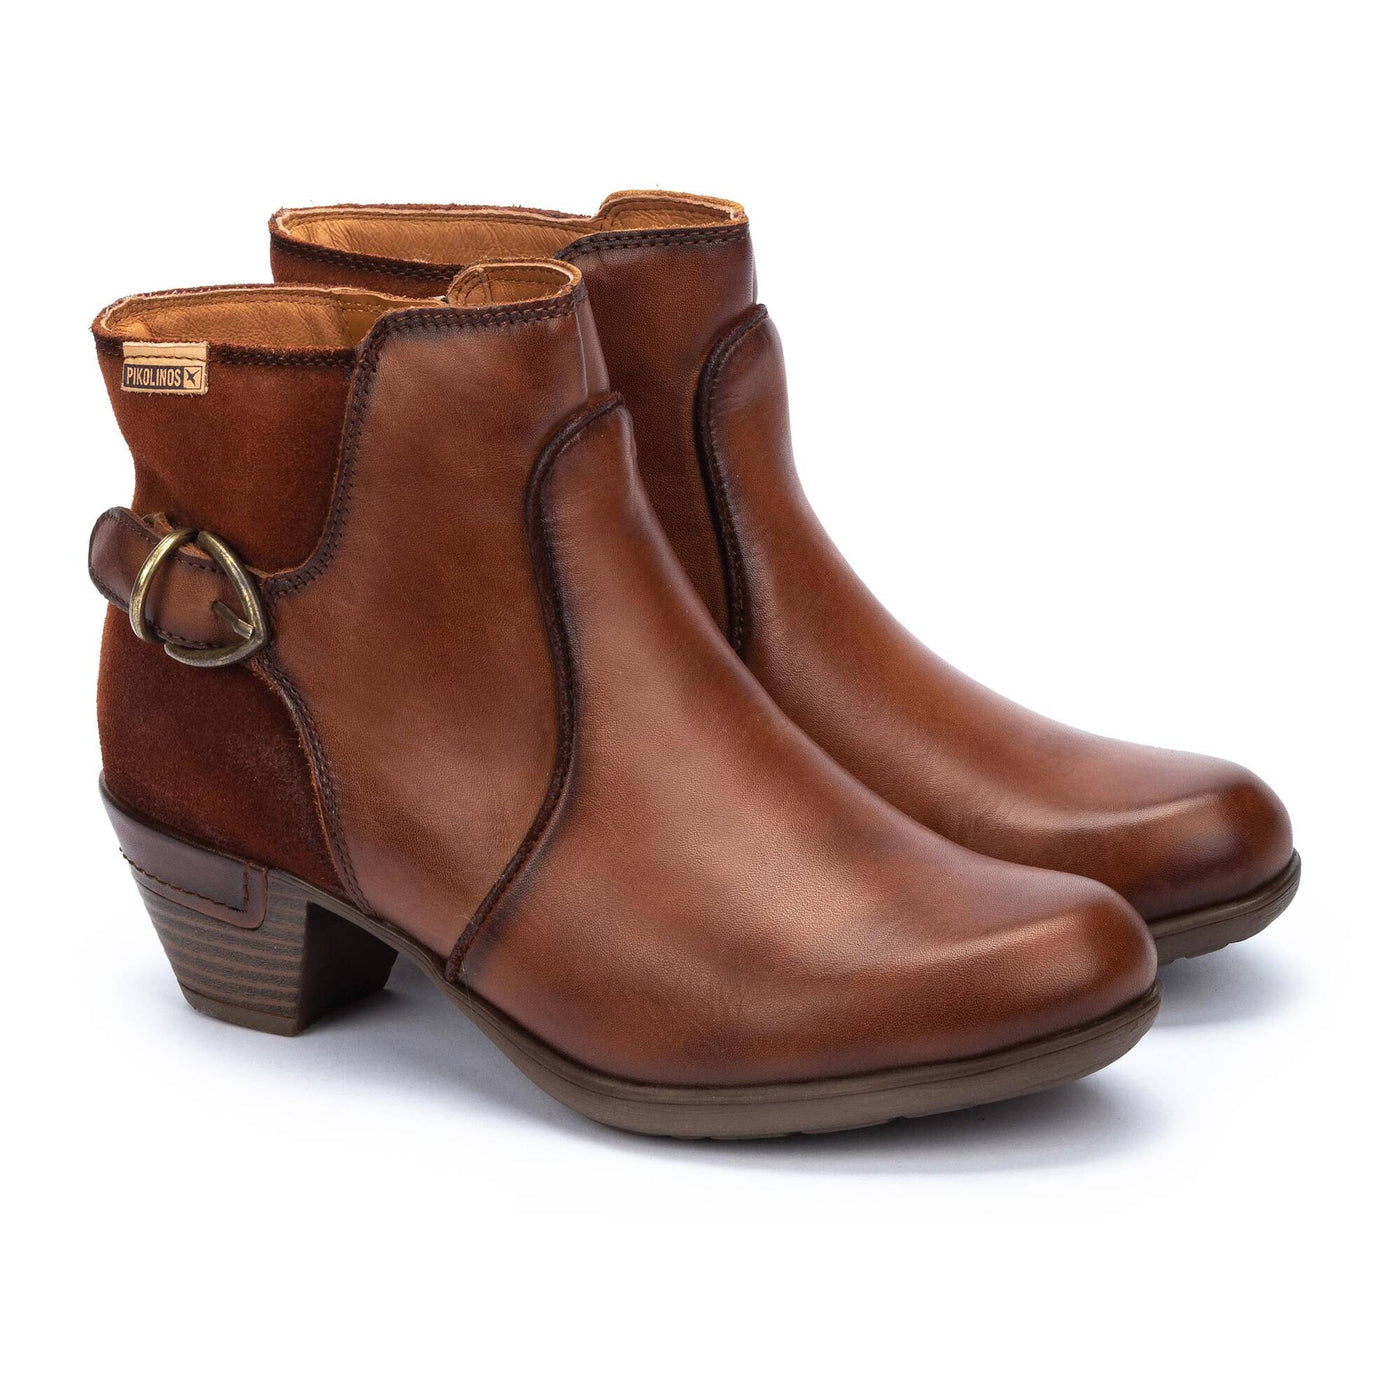 Rotterdam Ankle Boots with Decorative Buckle